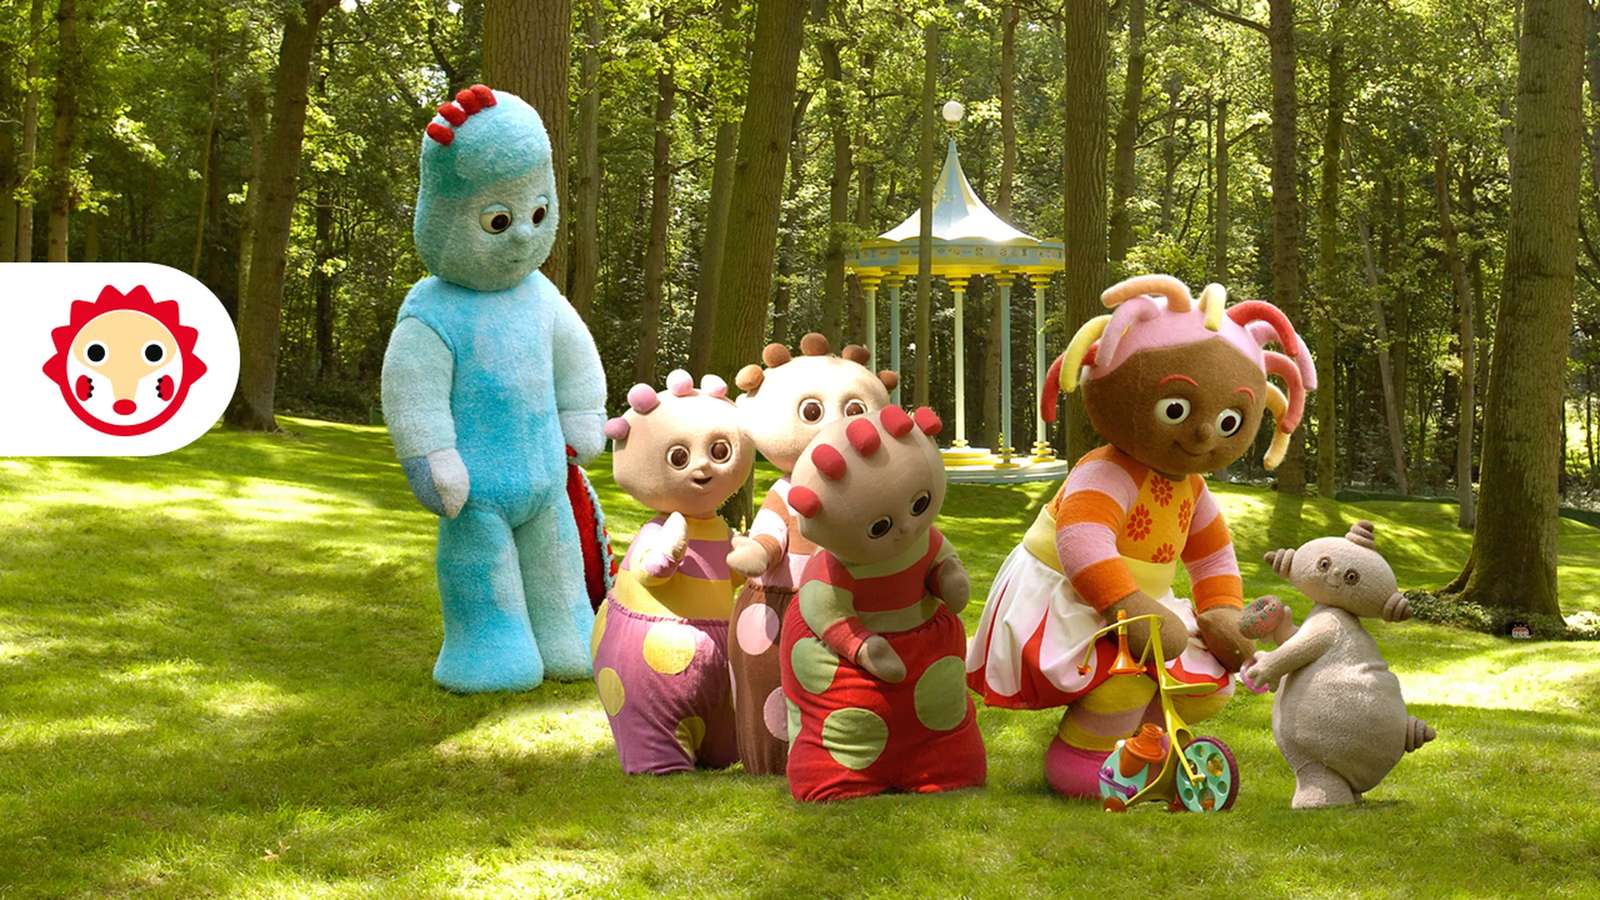 In The Night Garden: ABC iview puzzle online